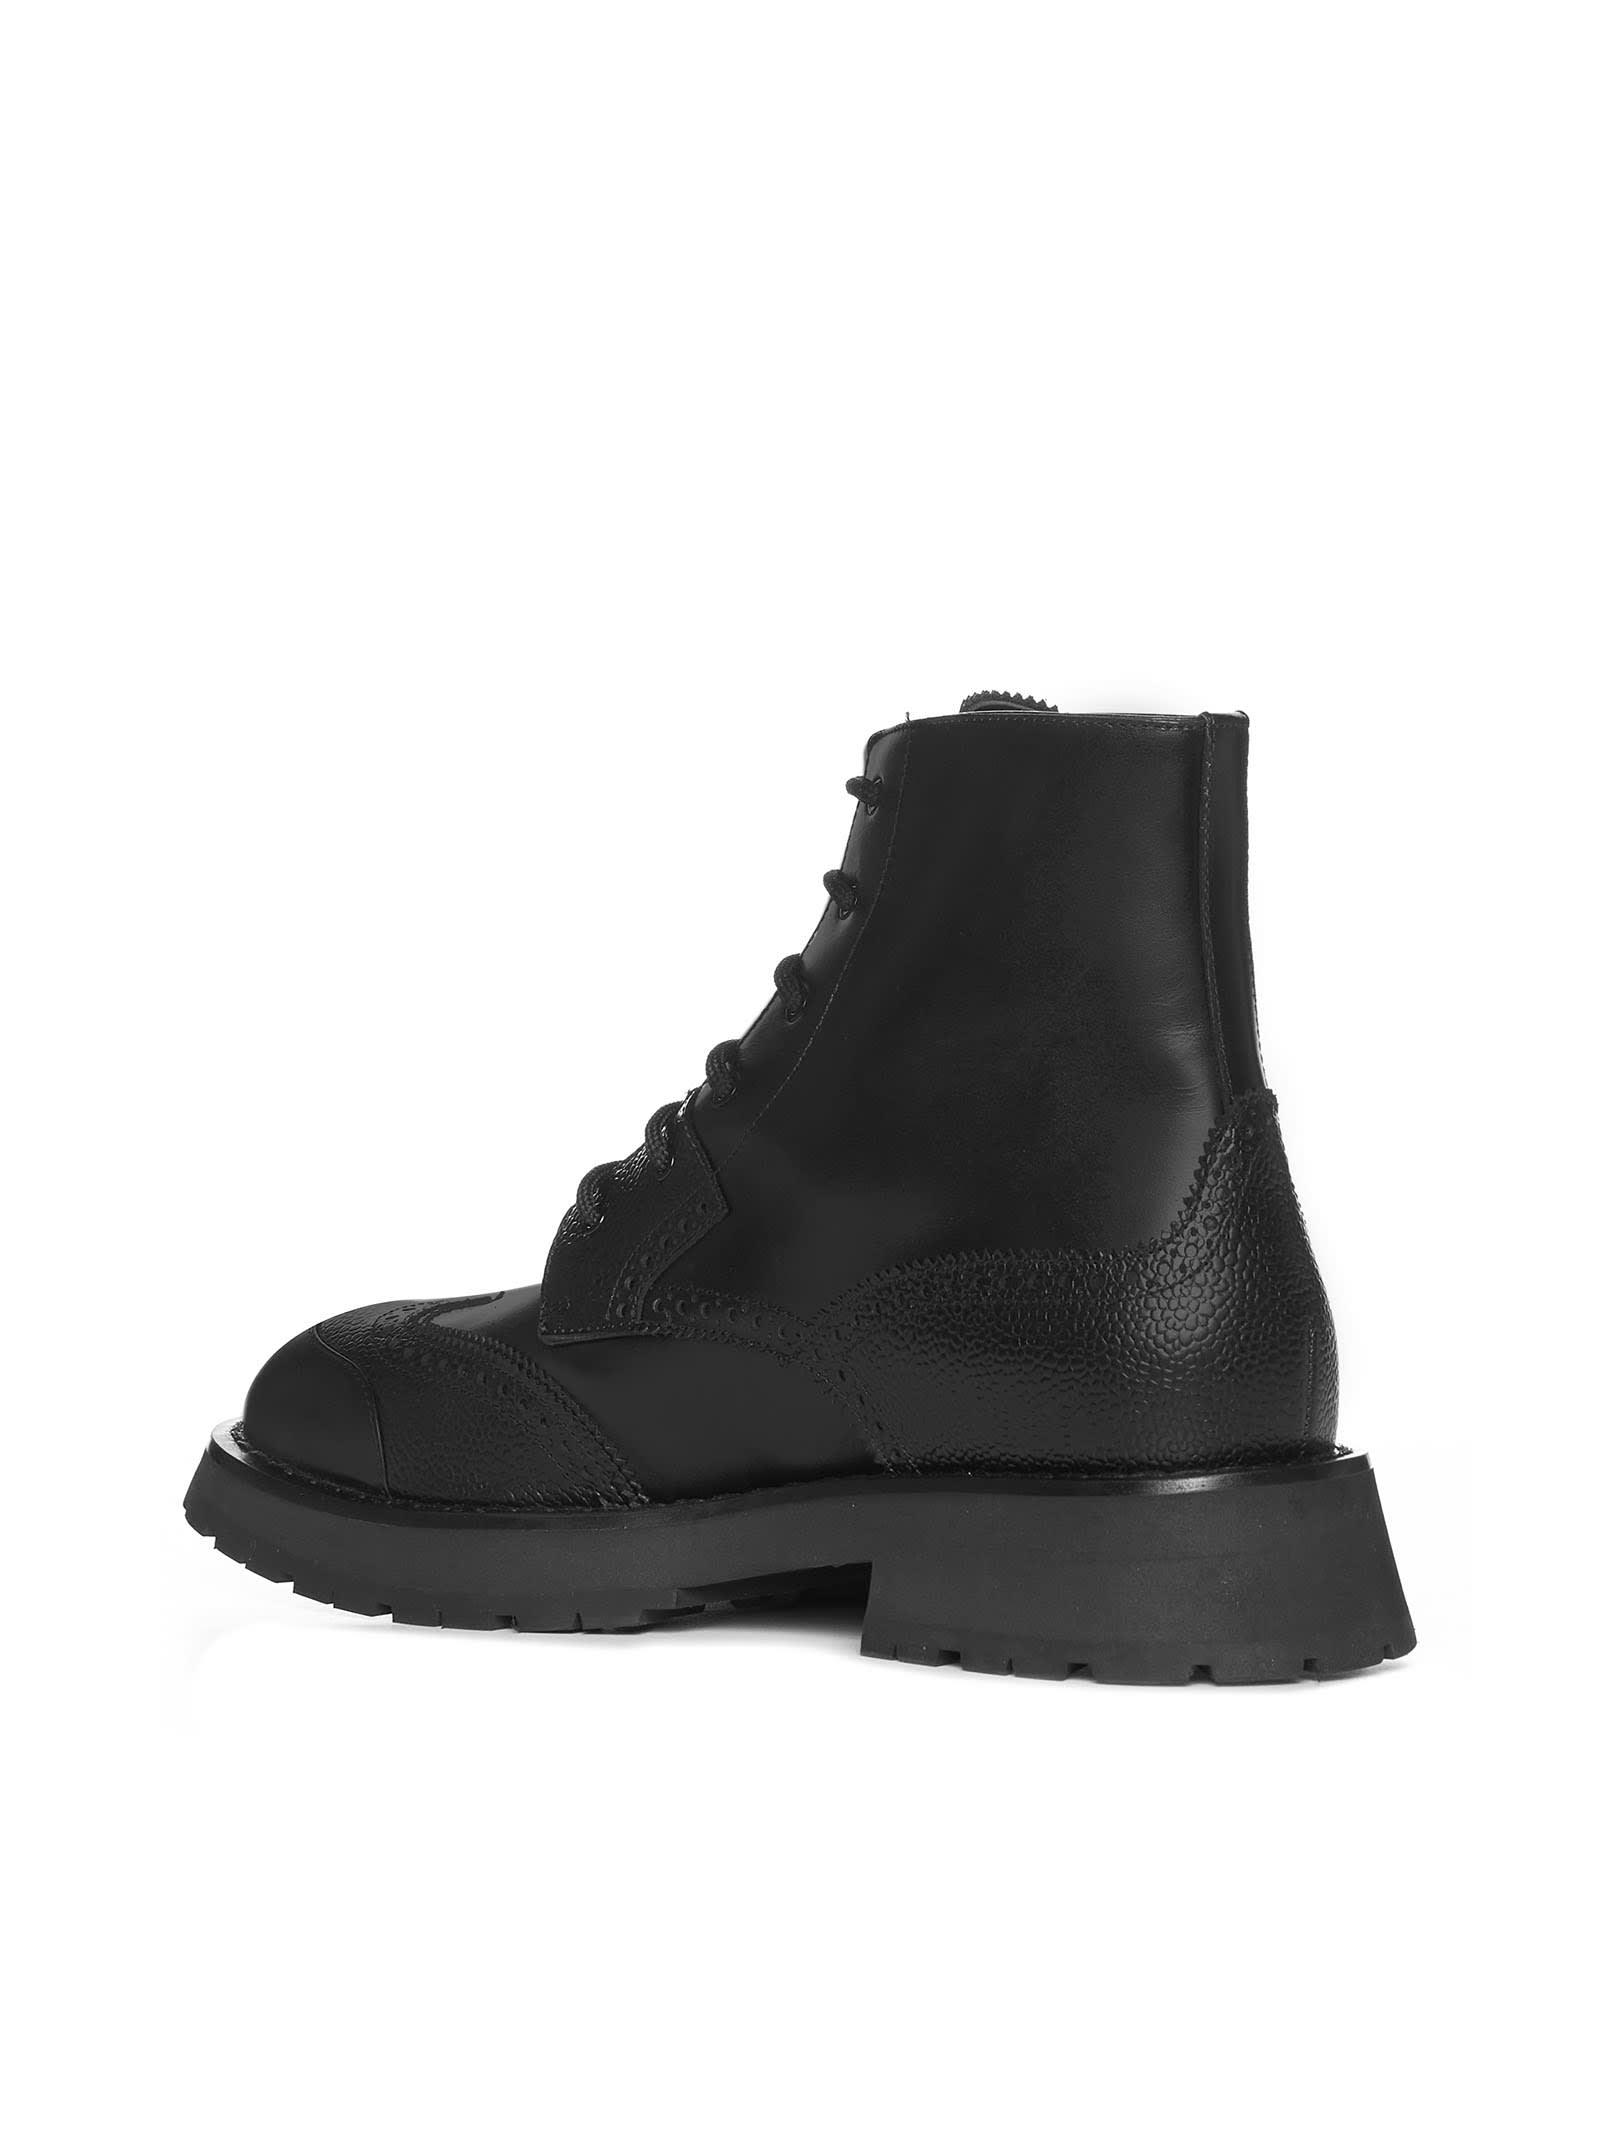 Alexander McQueen Worker Punk Ankle Boots - Alexander Mcqueen - Black/White  - Leather Boots on SALE